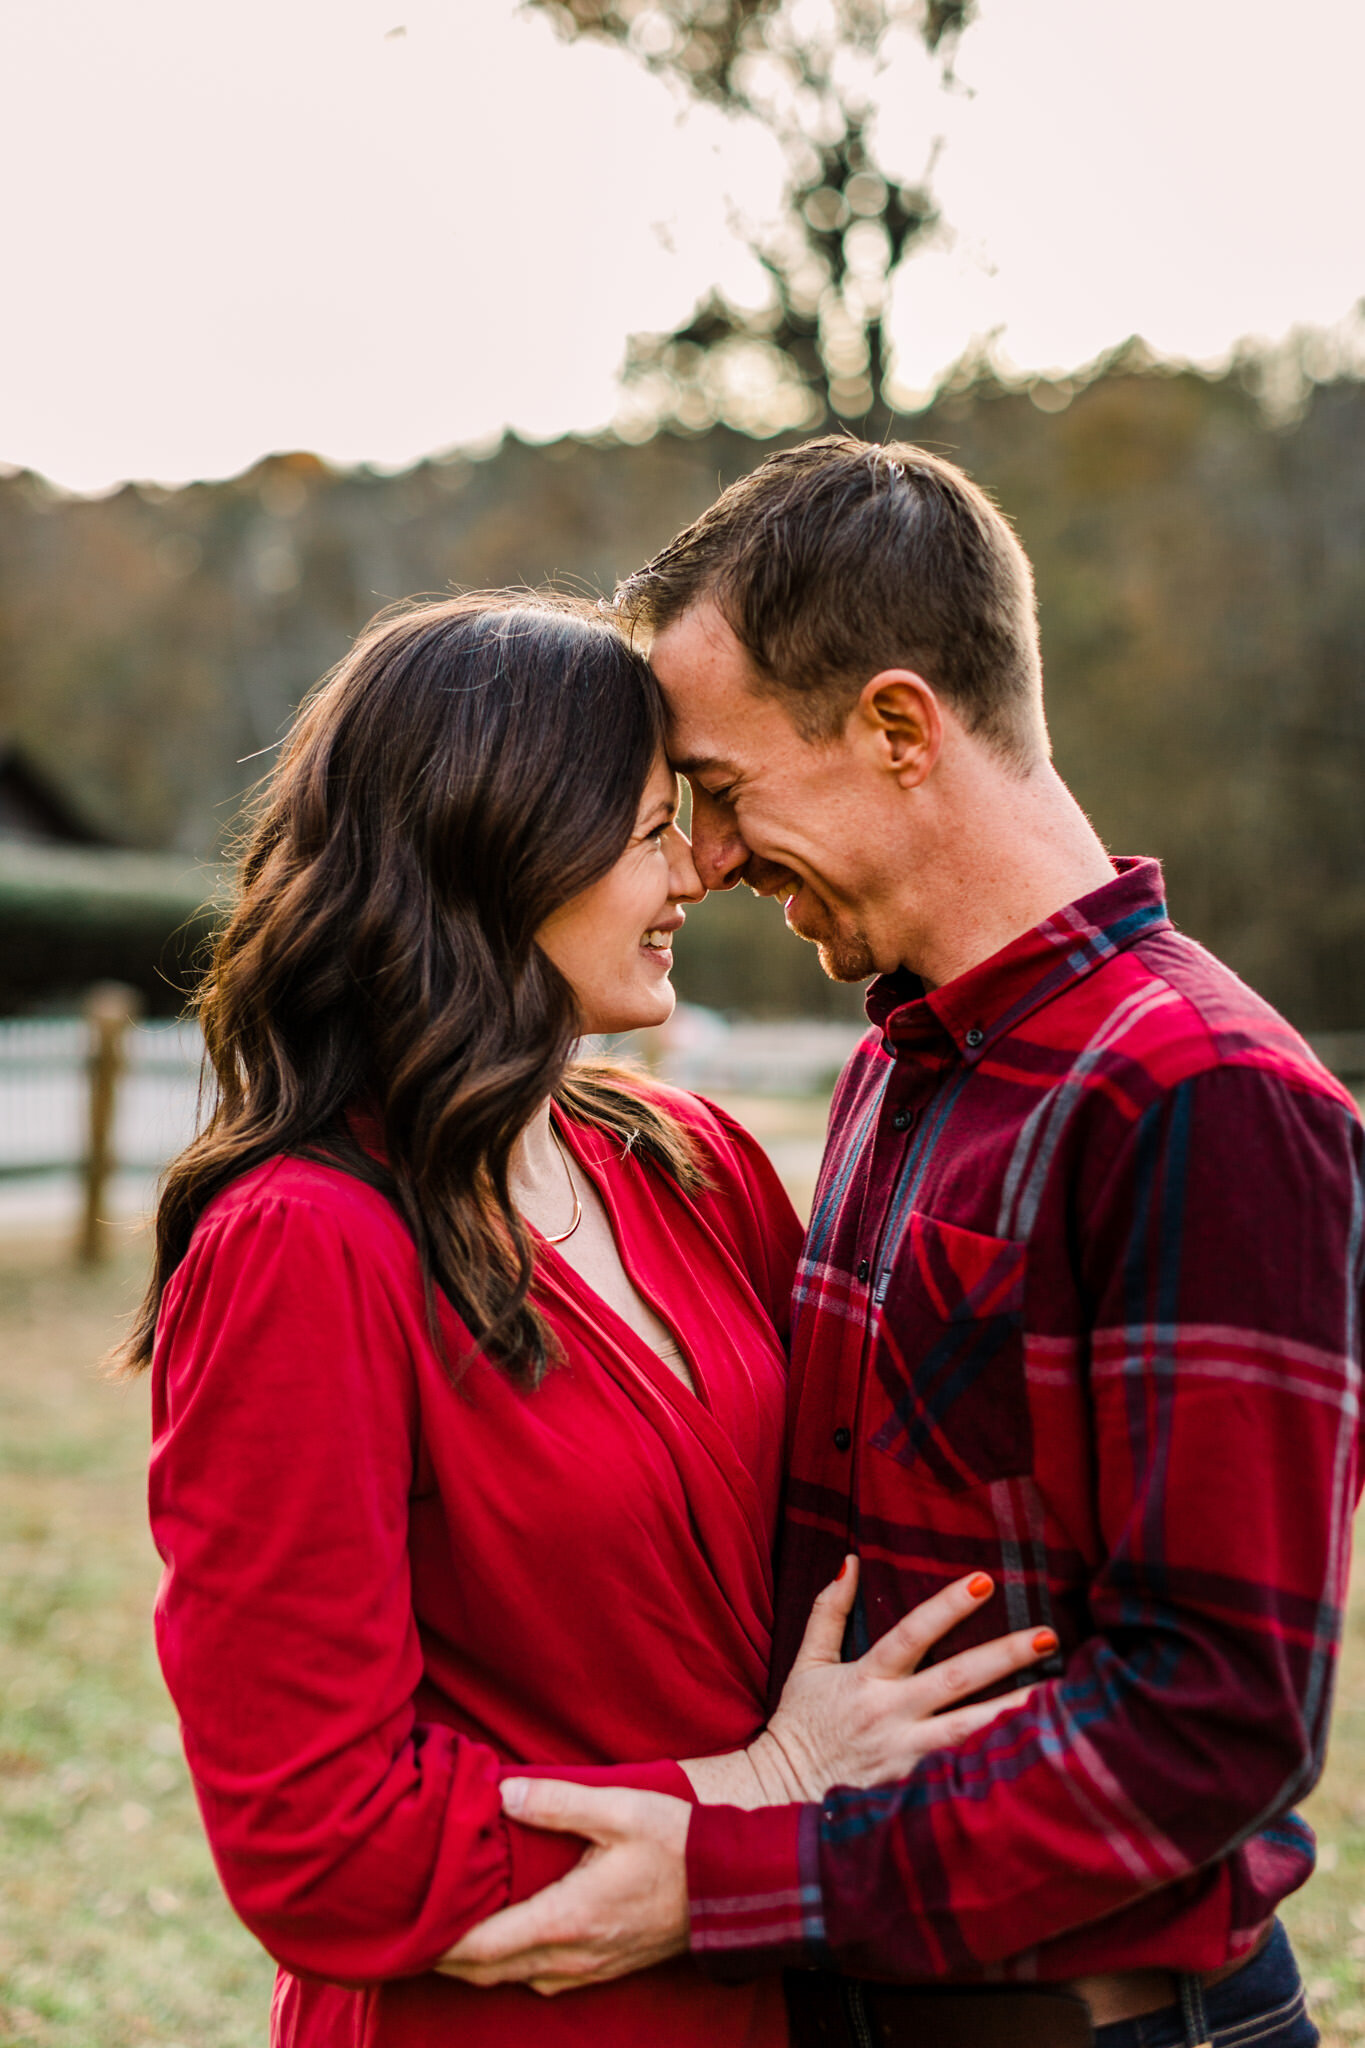 Durham Photographer | By G. Lin Photography | West Point on Eno River | Couple laughing outside together and embracing one another | West Point on Eno River